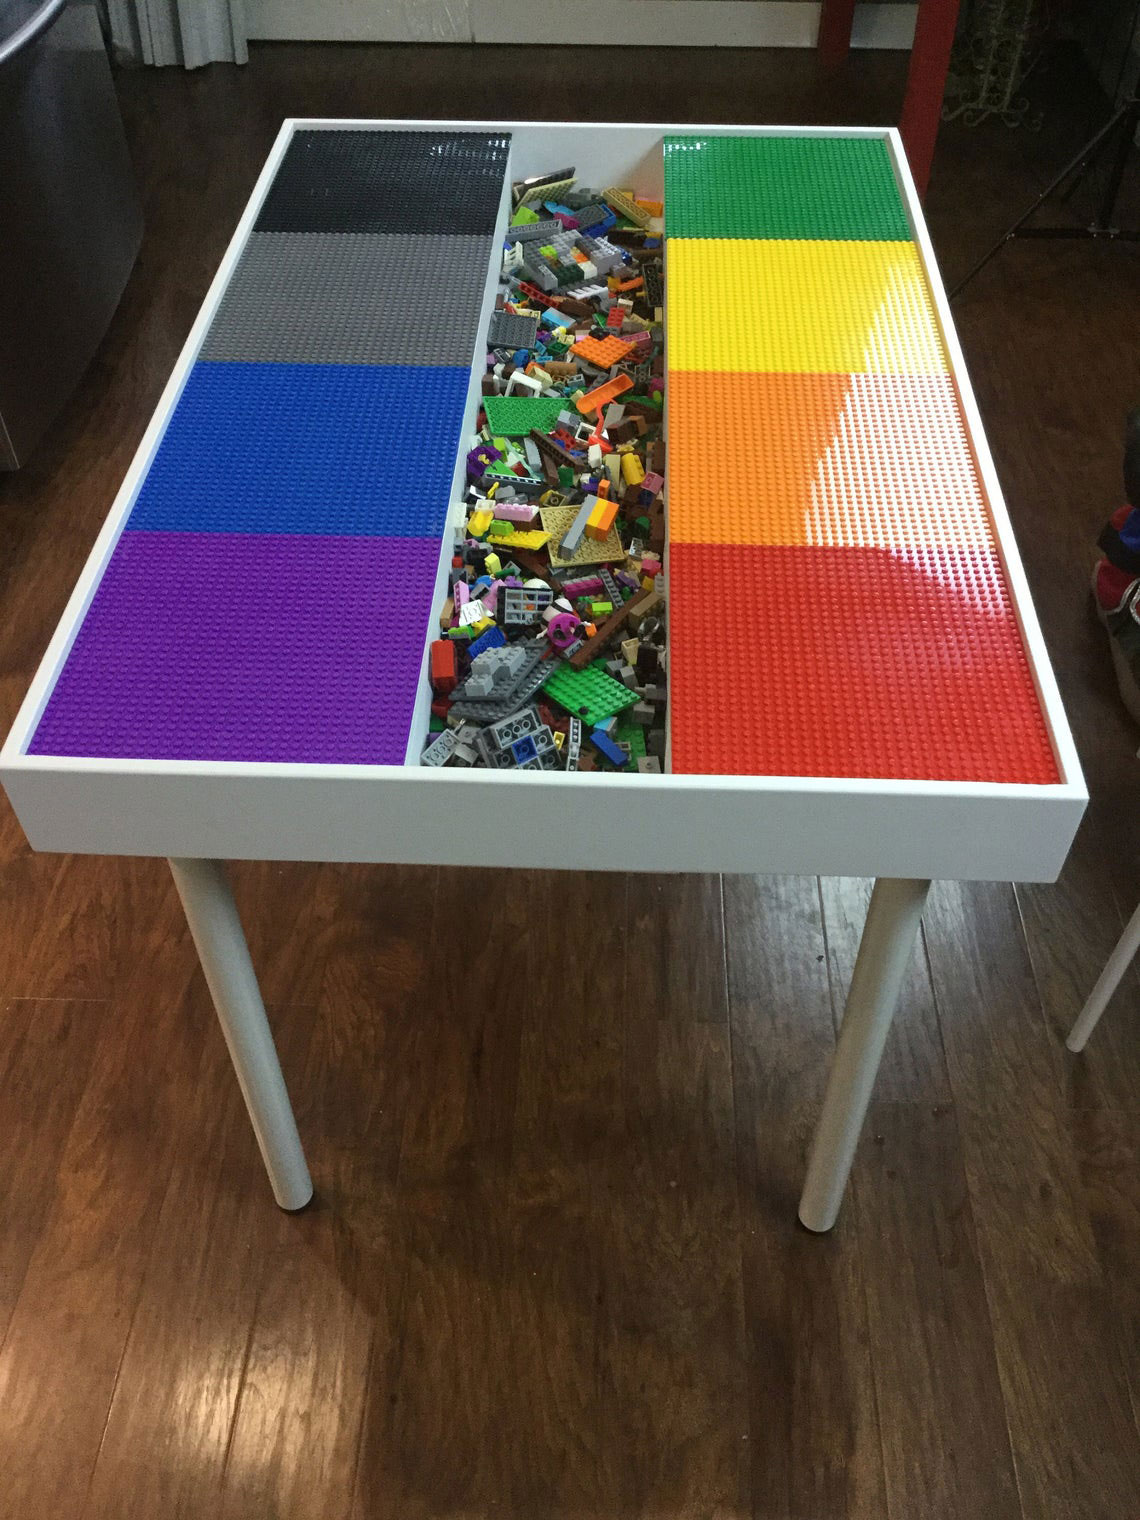 Lego Table – center storage pocket – The Queen of Games